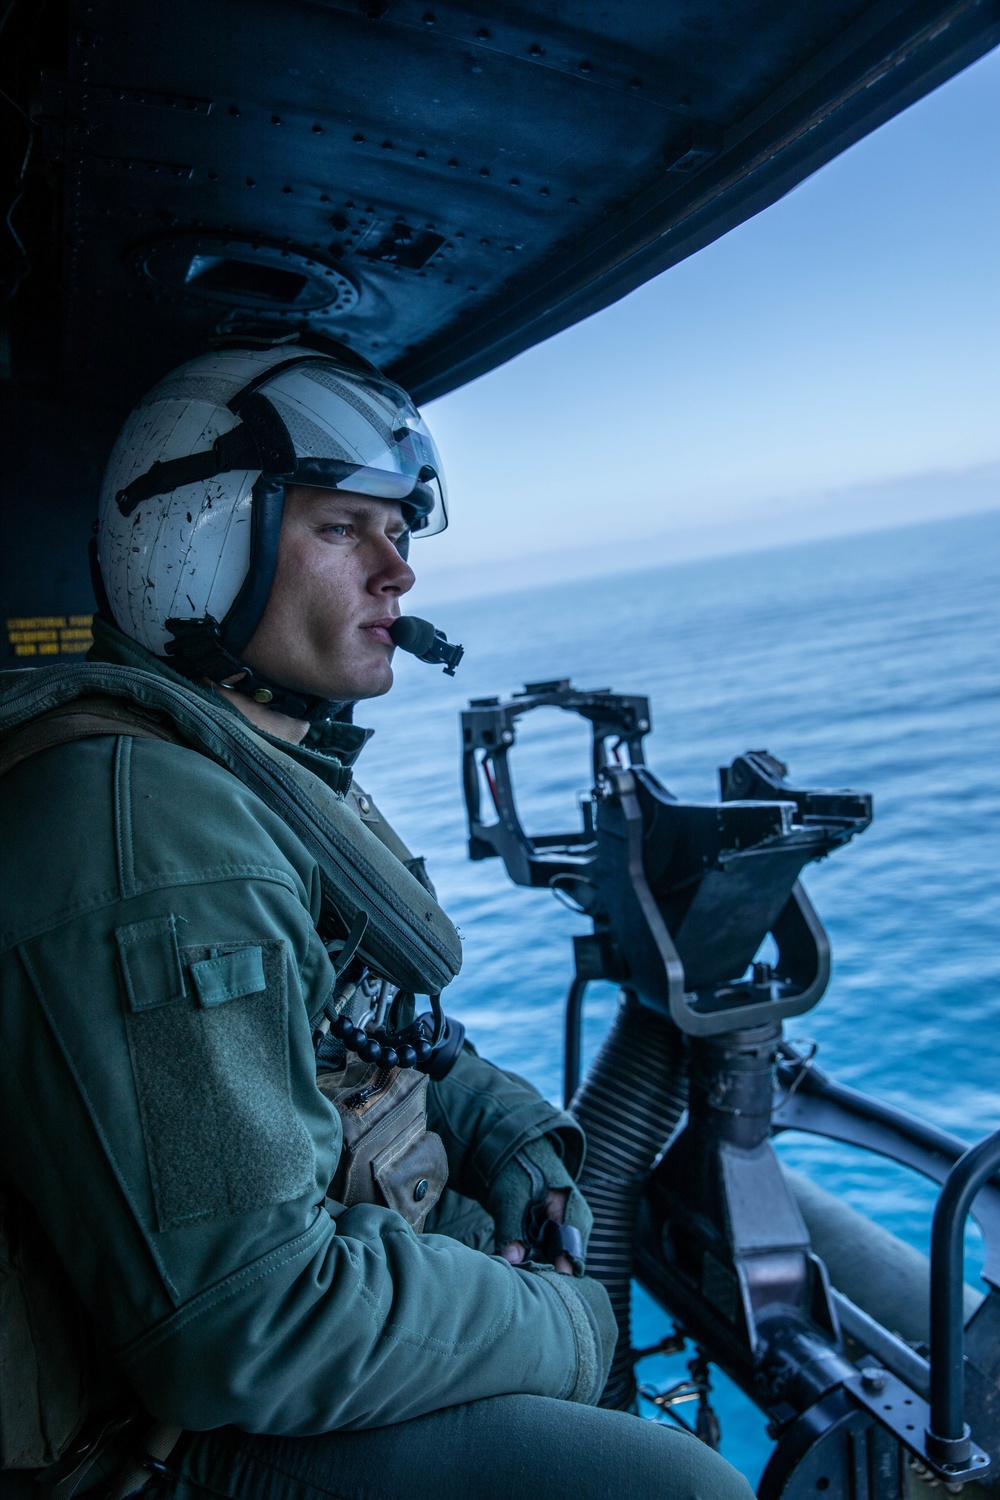 Marine Light Attach Helicopter Squadron 267 employing Intrepid Tiger II Electronic Warfare capabilities